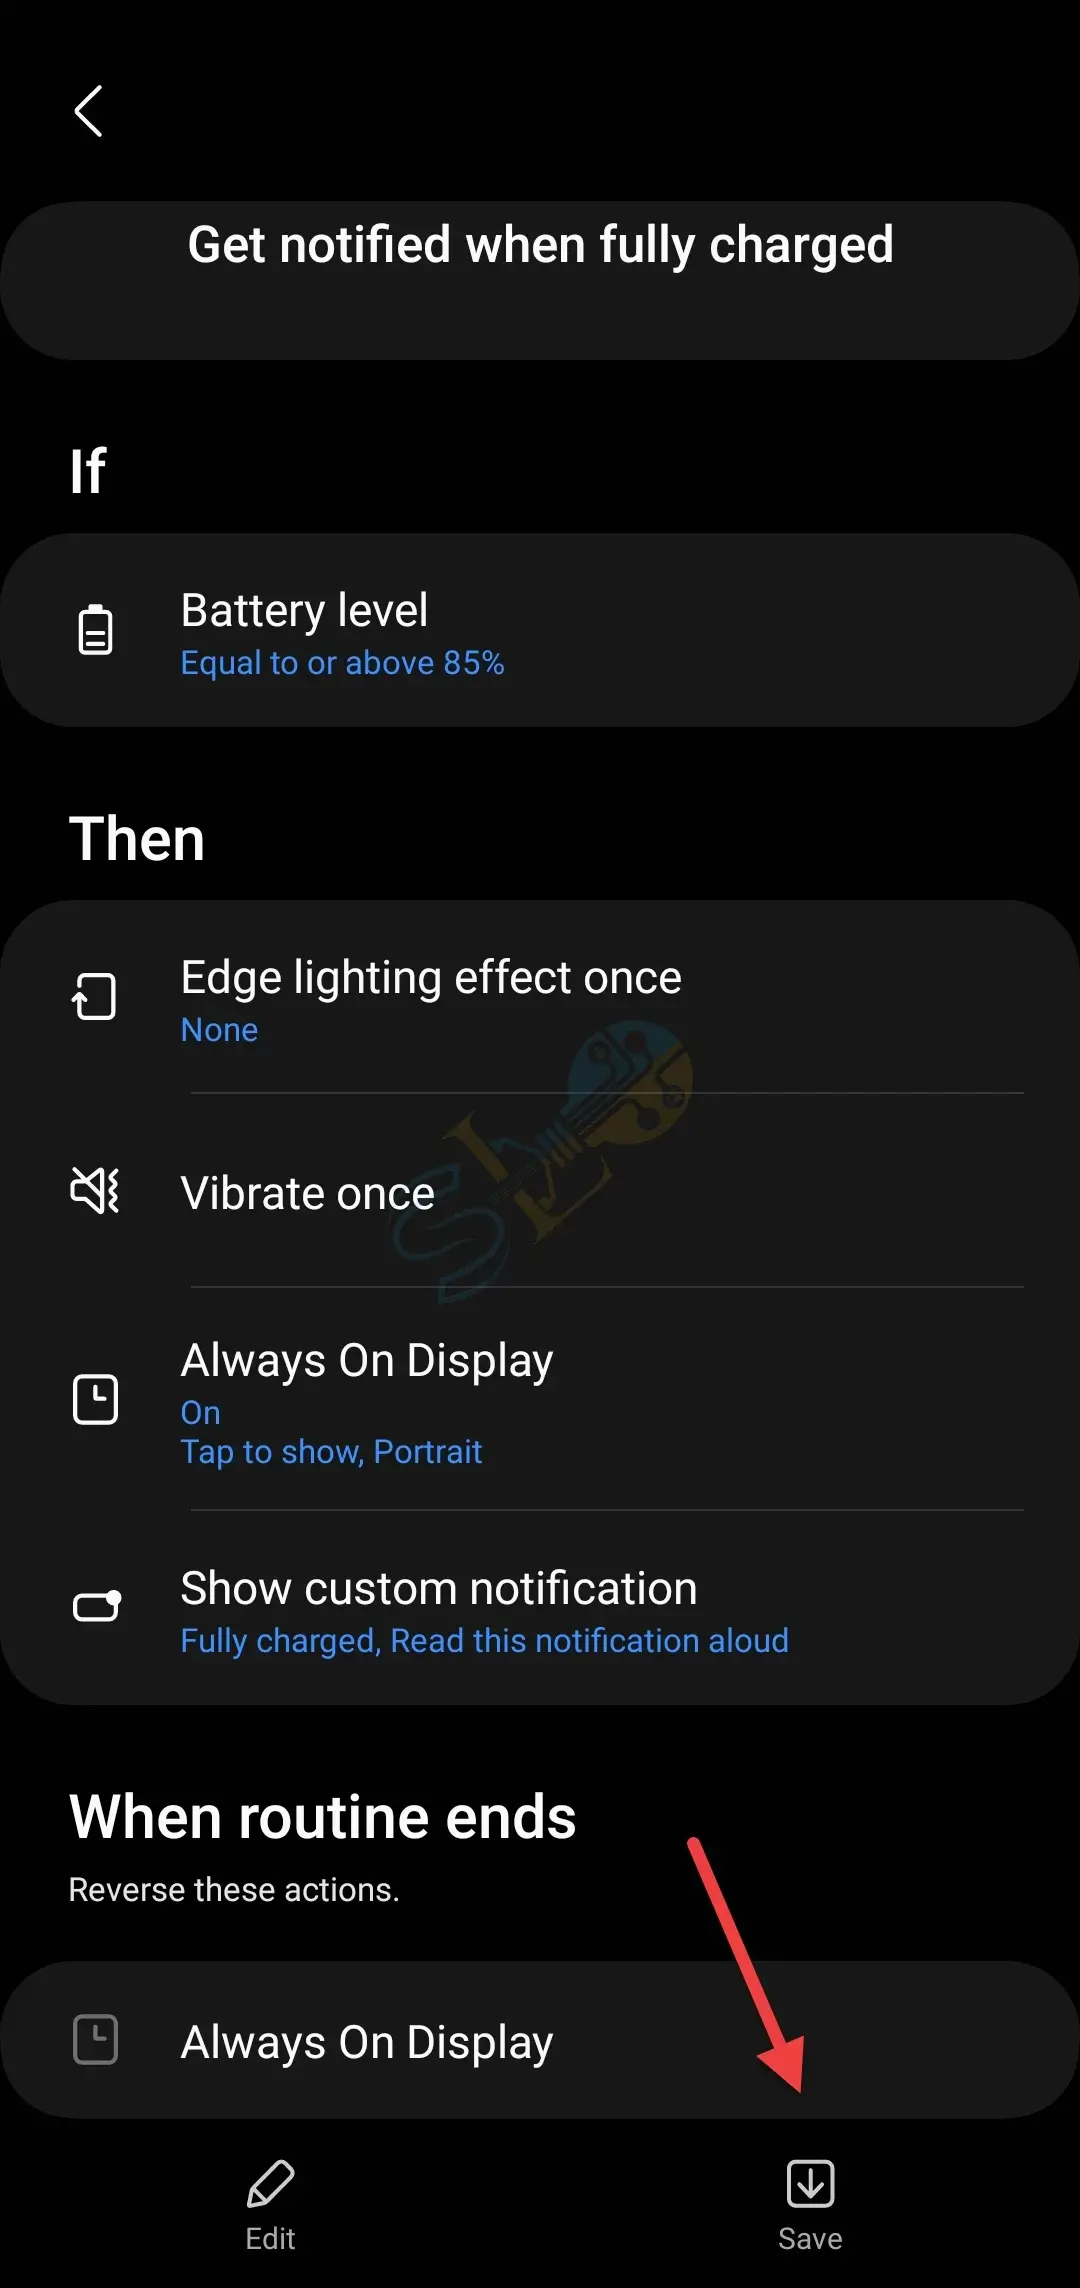 How to Get Notified when the Battery is Fully Charged on Samsung